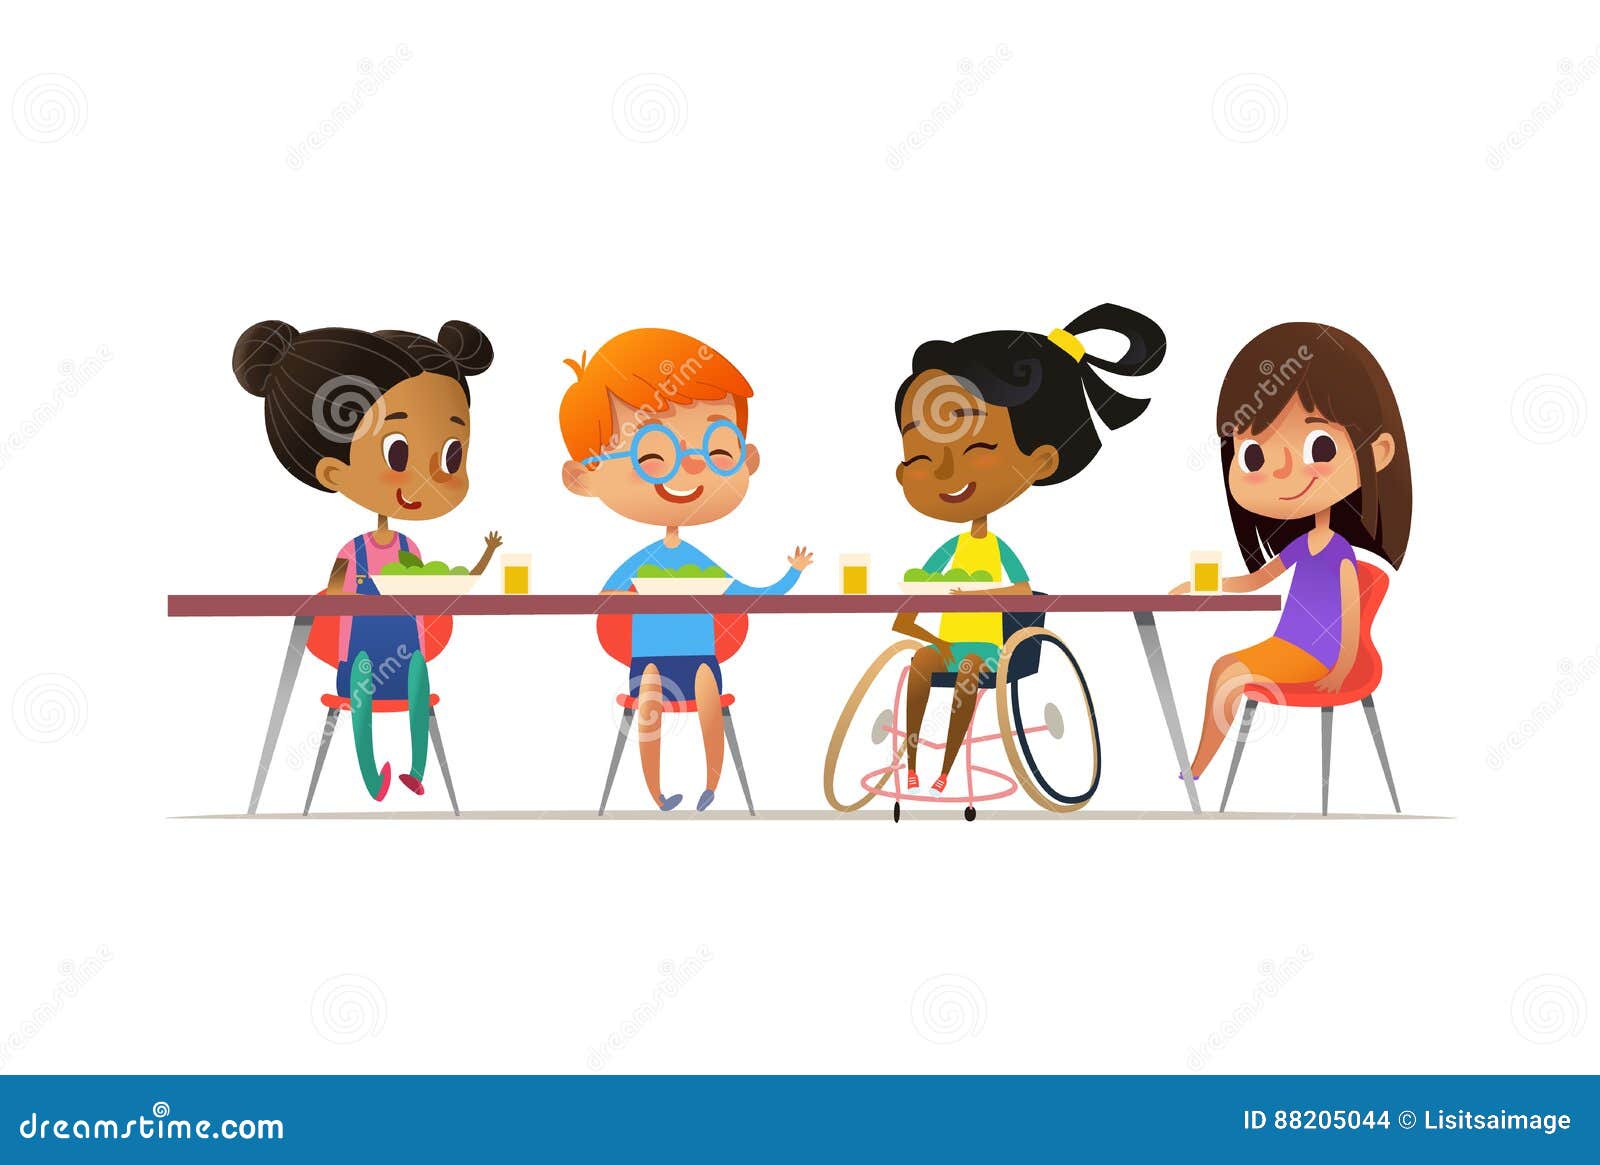 Kids In A Canteen Buying And Eating Lunch. Children Eat In School Canteen  Royalty Free SVG, Cliparts, Vectors, and Stock Illustration. Image  170908936.